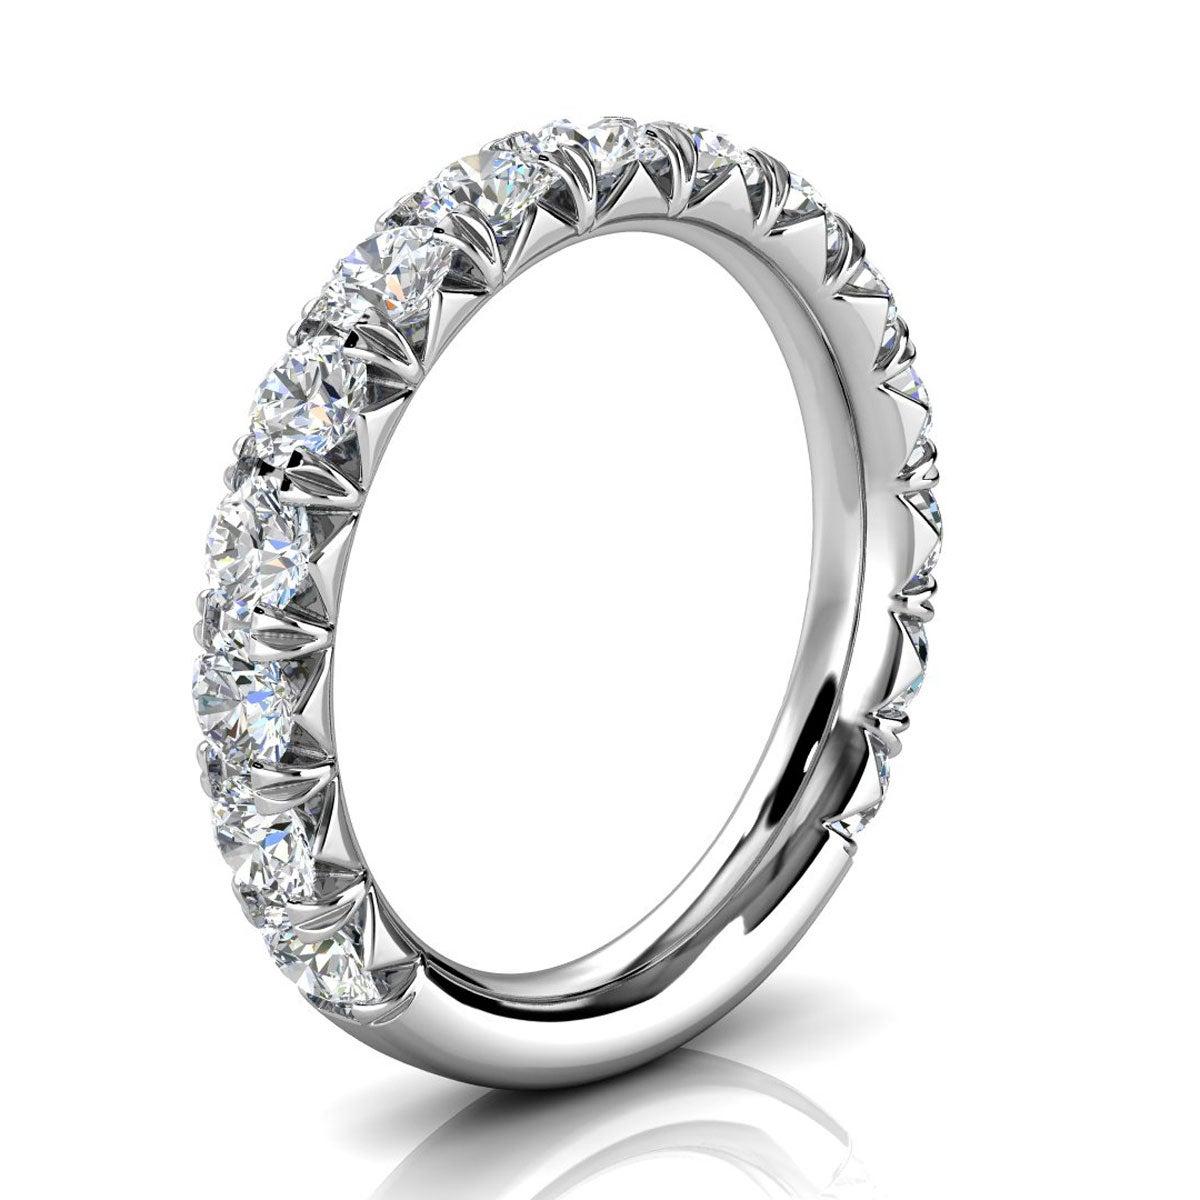 For Sale:  14k White Gold GIA French Pave Diamond Ring '1 1/2 Ct. Tw' 2